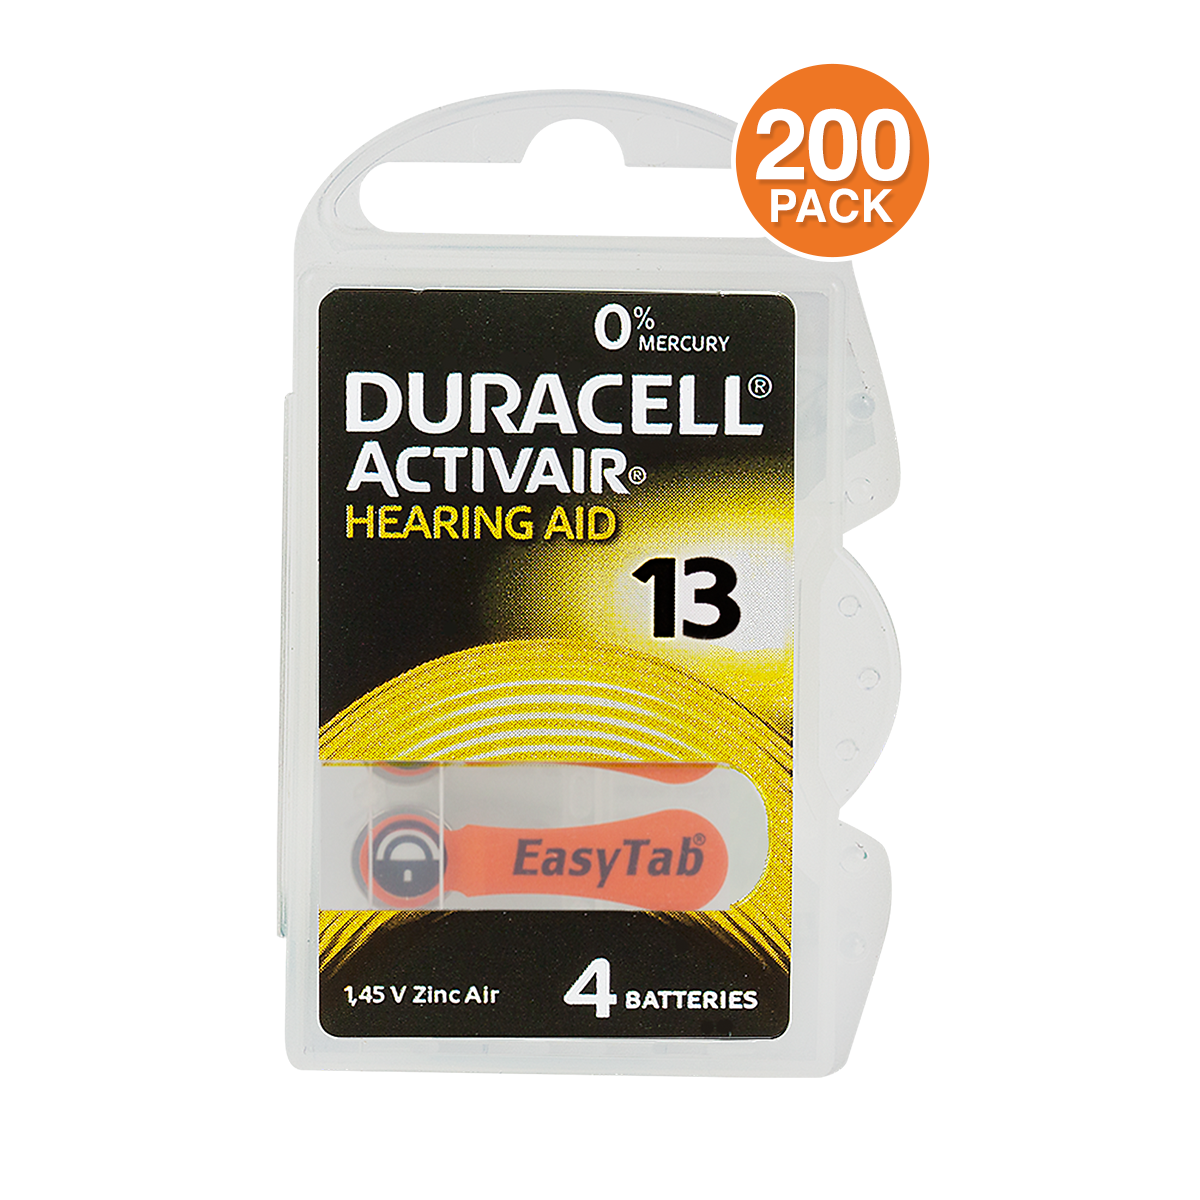 Duracell Hearing Aid Battery Size 13 (200 Pcs)